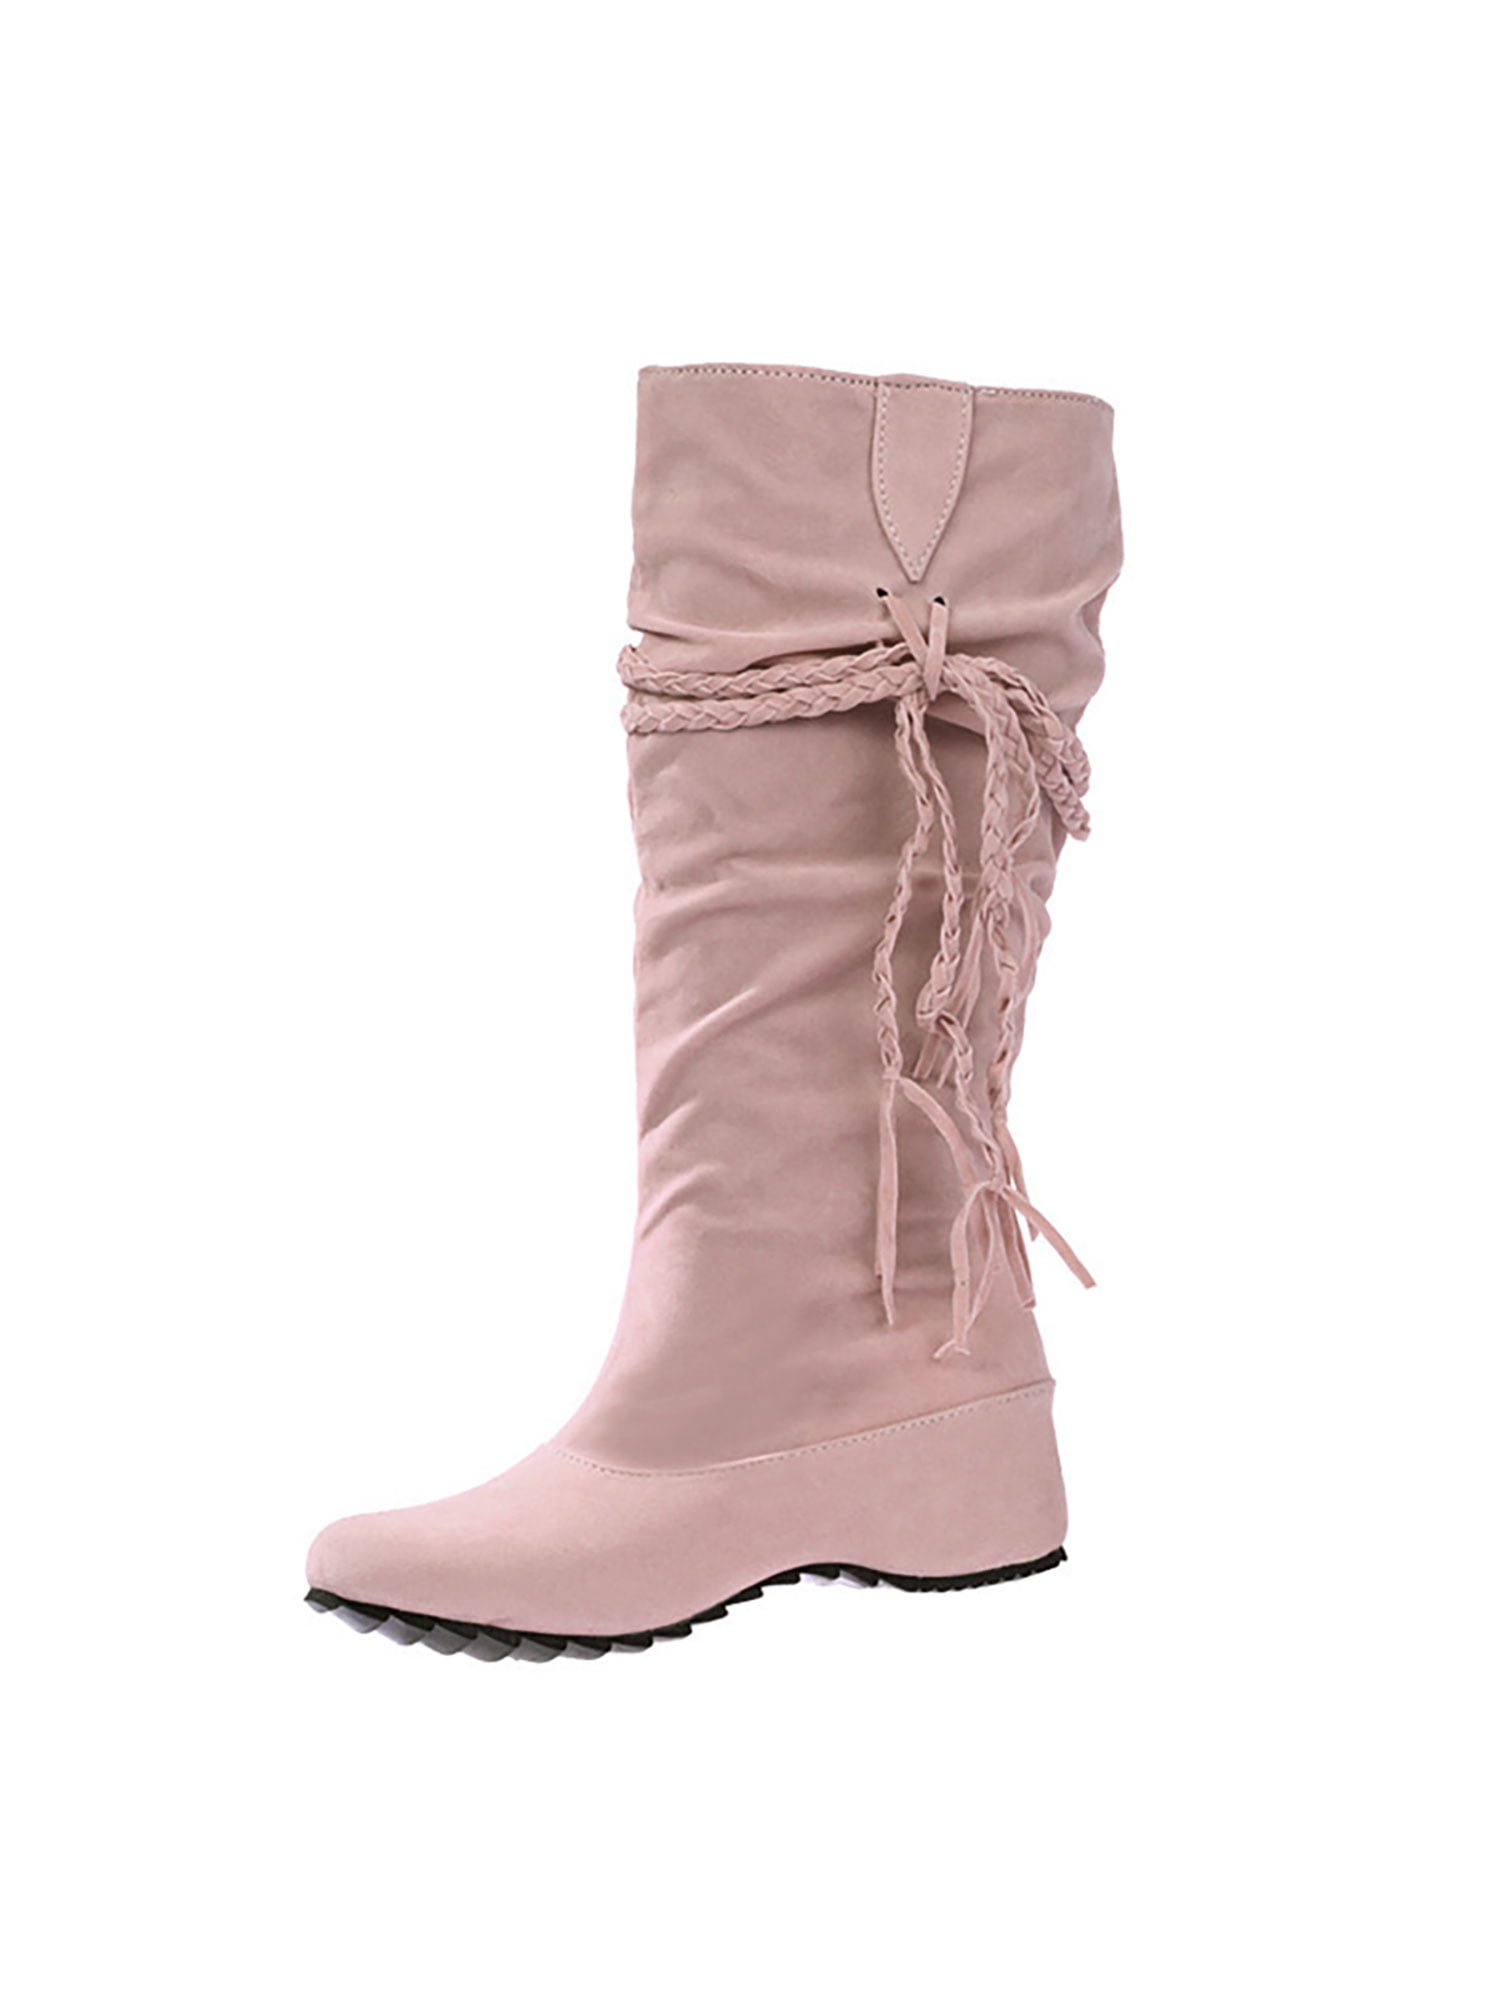 Pull On Knee Boots Winter Ymiytan Women\'s Flat Fashion Boot Slouchy Pink High 6.5